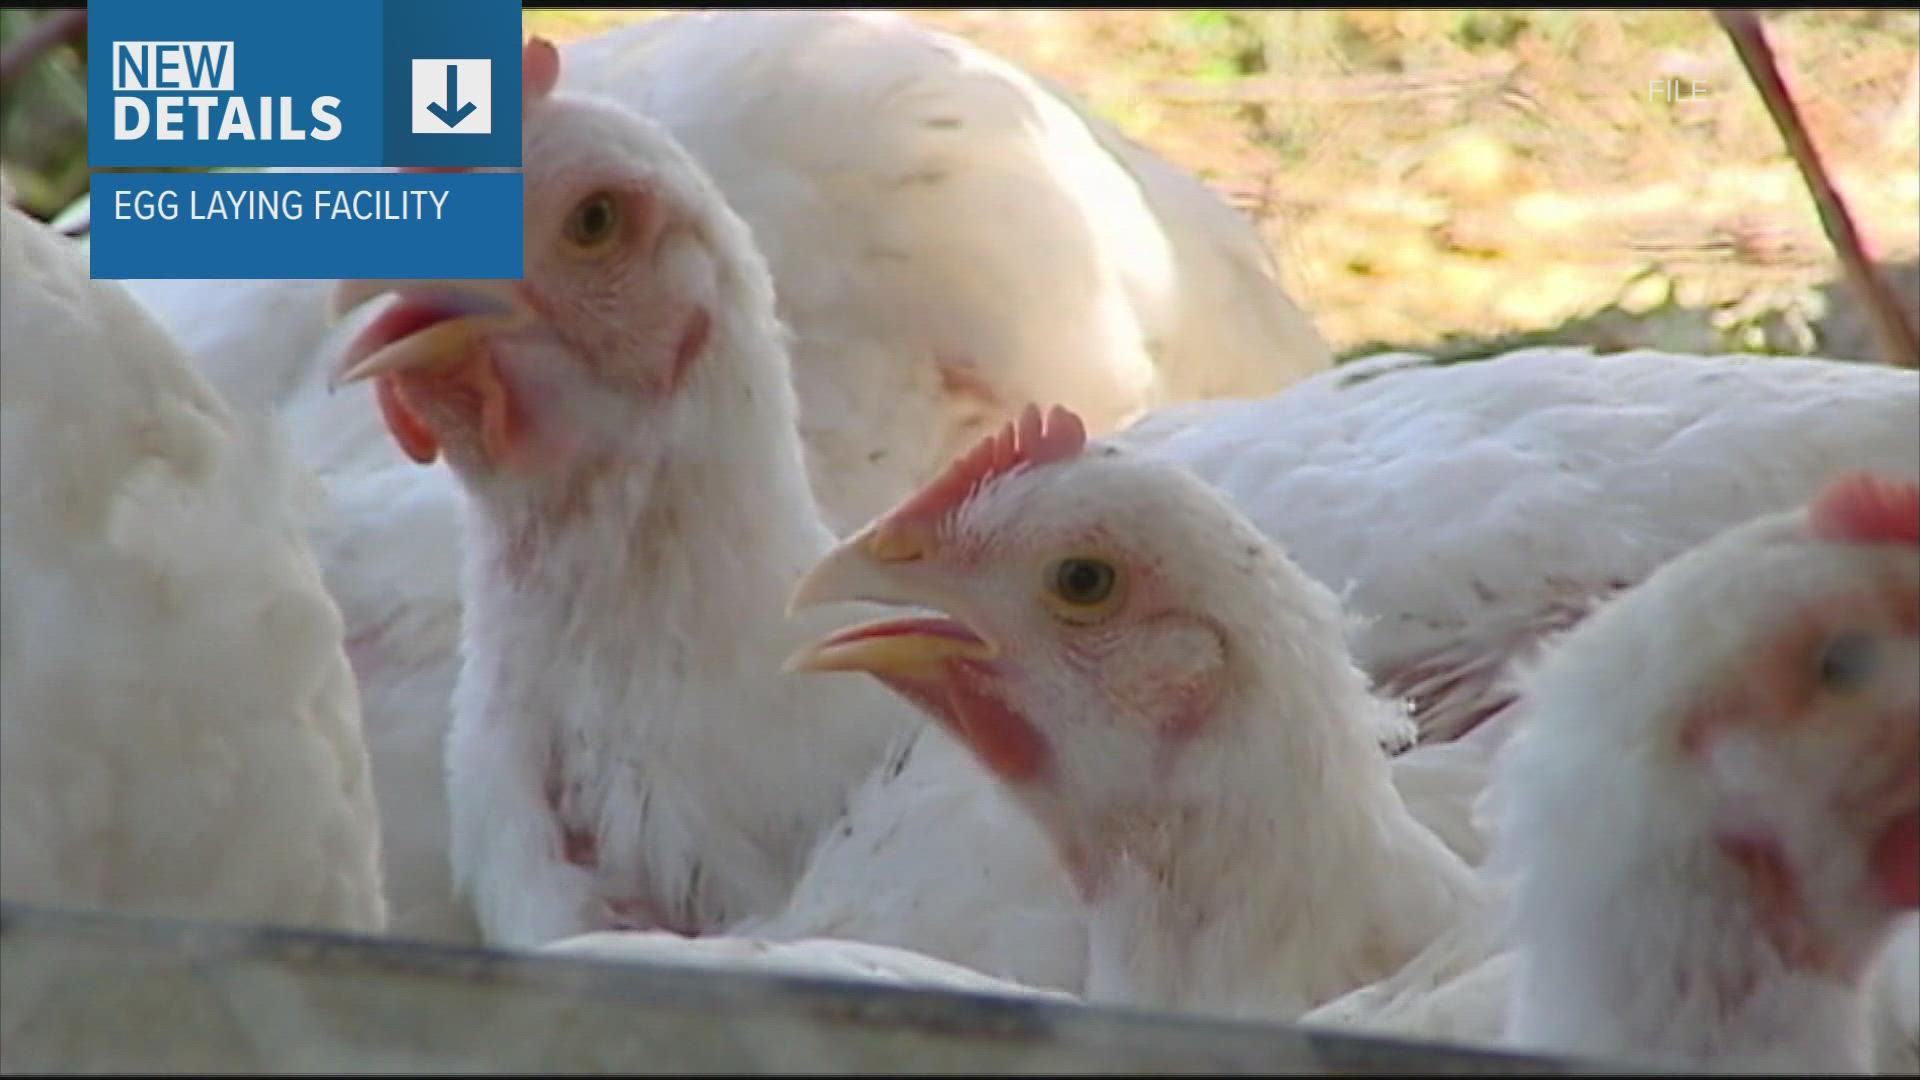 Weld is the fourth Colorado county to have known cases of Highly Pathogenic Avian Influenza.